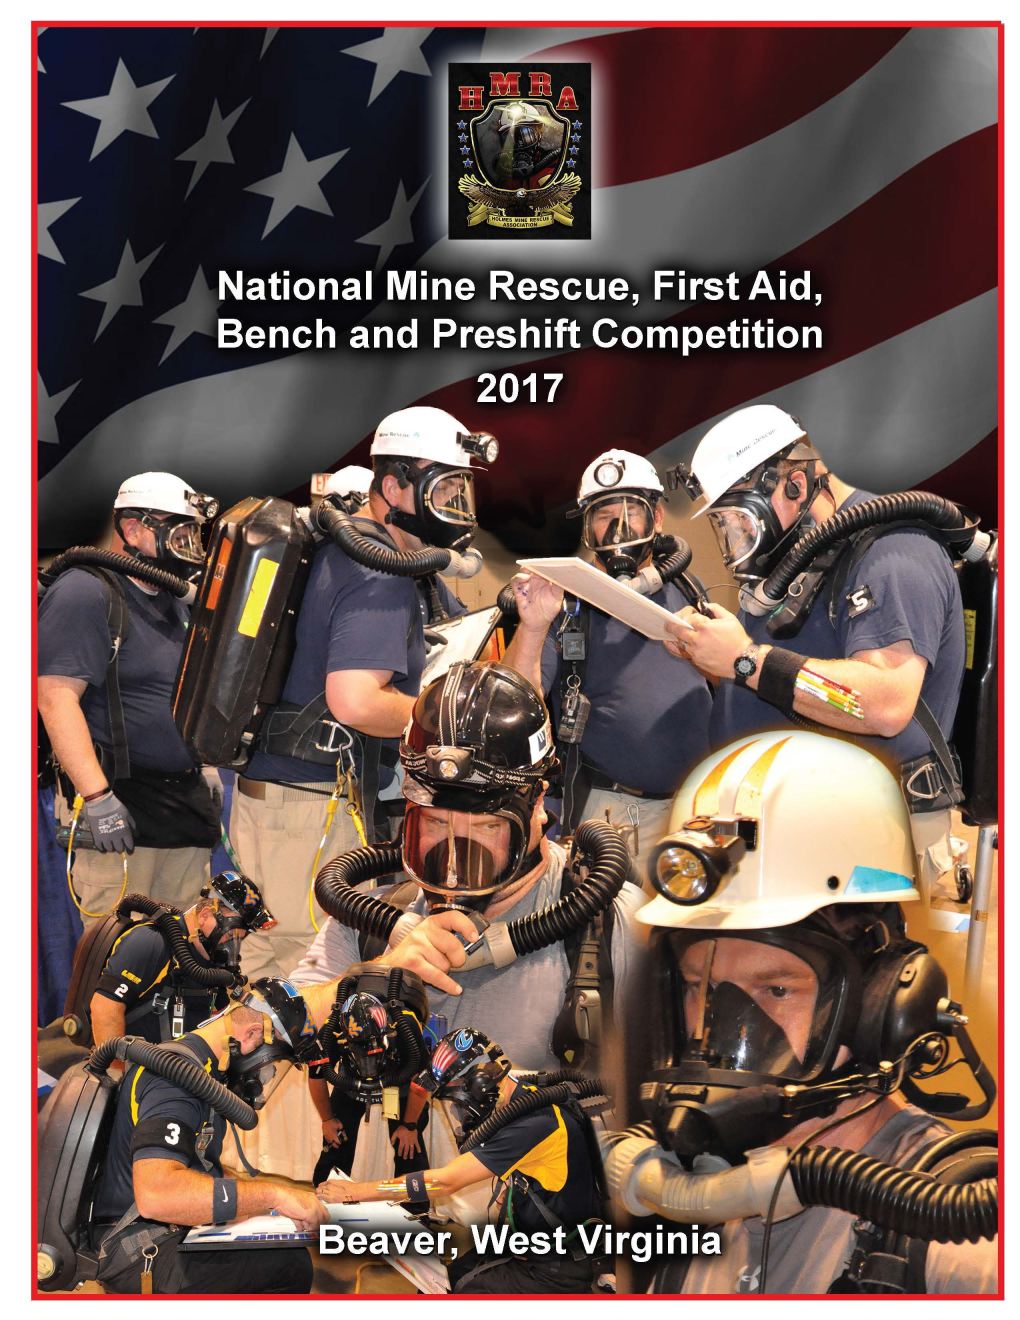 National Mine Rescue, First Aid Bench and Preshift Competition 2017